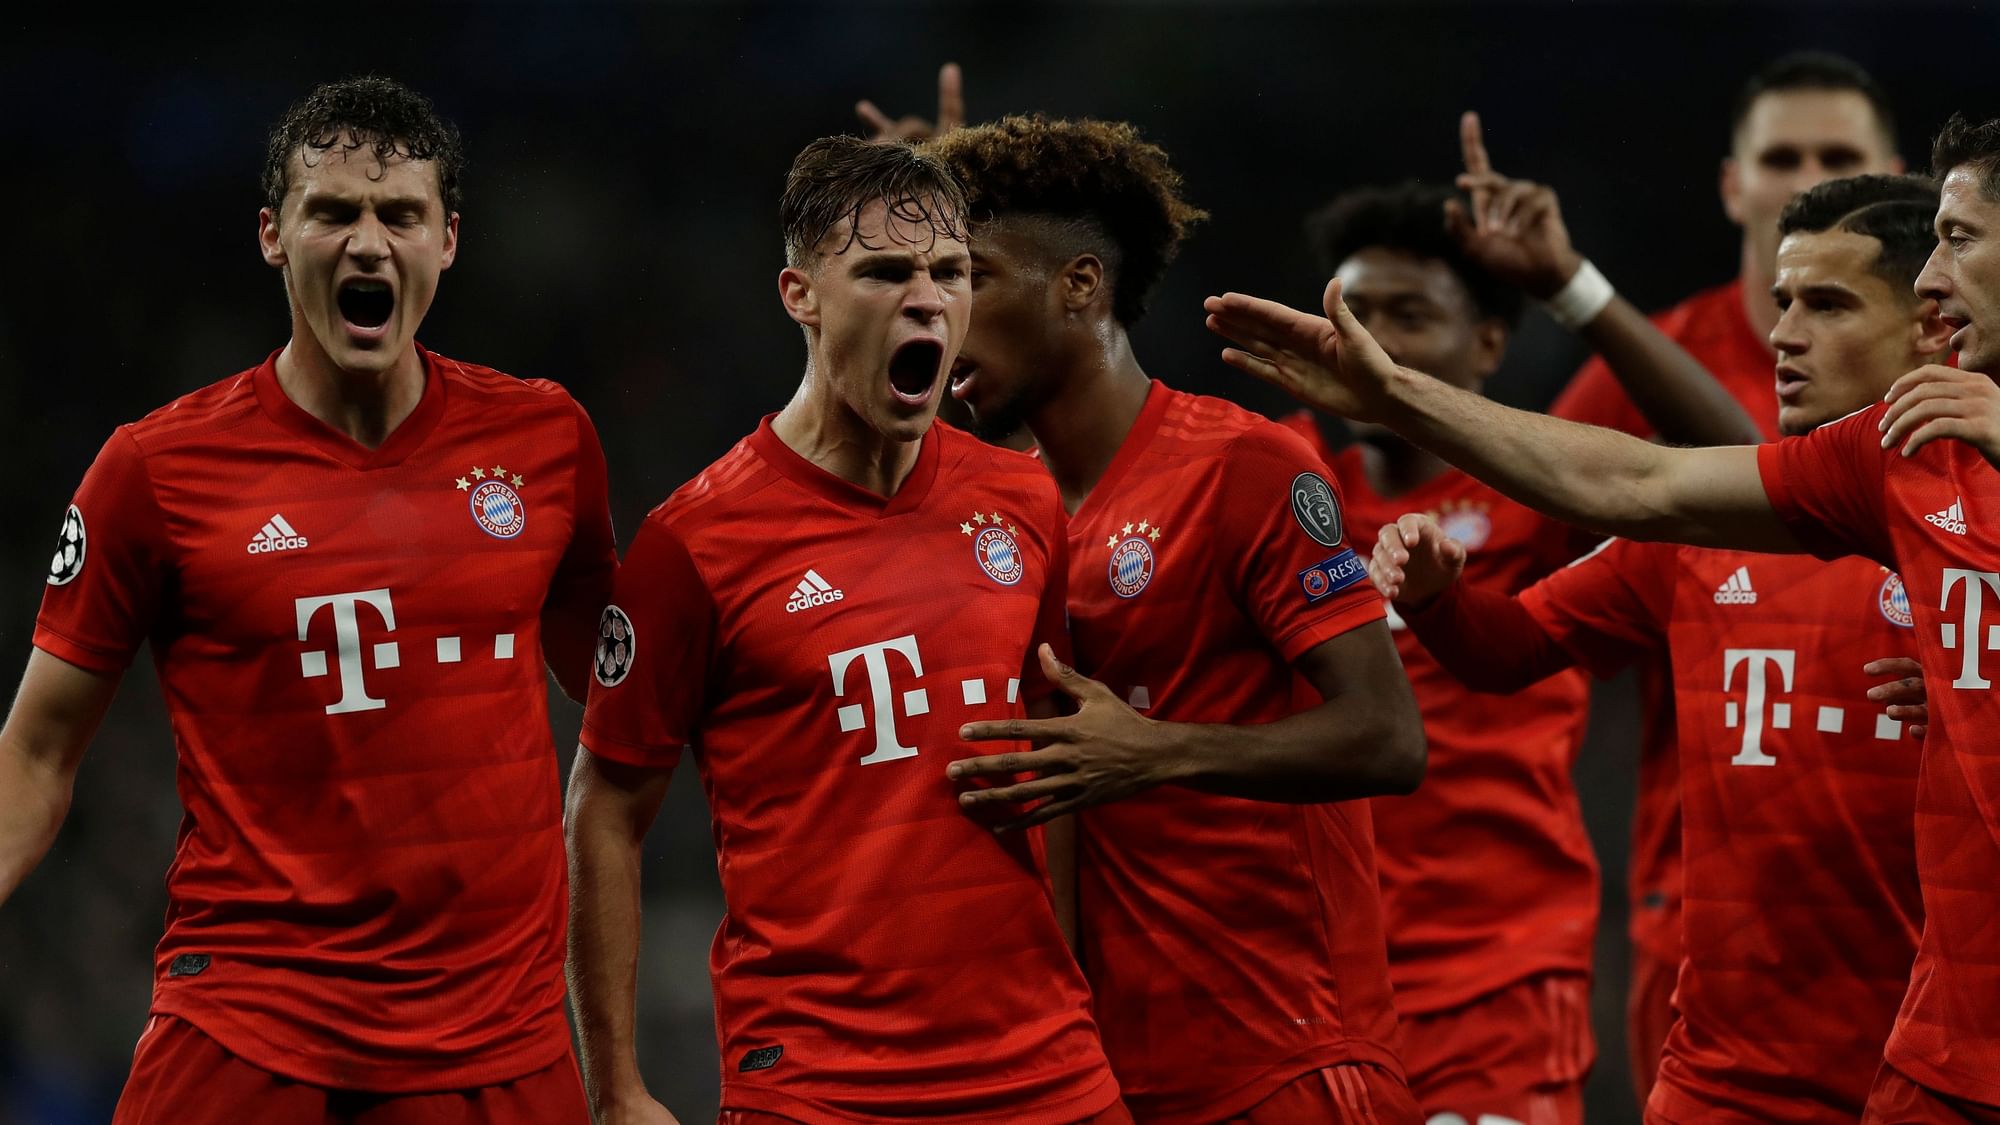 Tottenham was picked off repeatedly by Bayern Munich in a humiliating 7-2 loss.